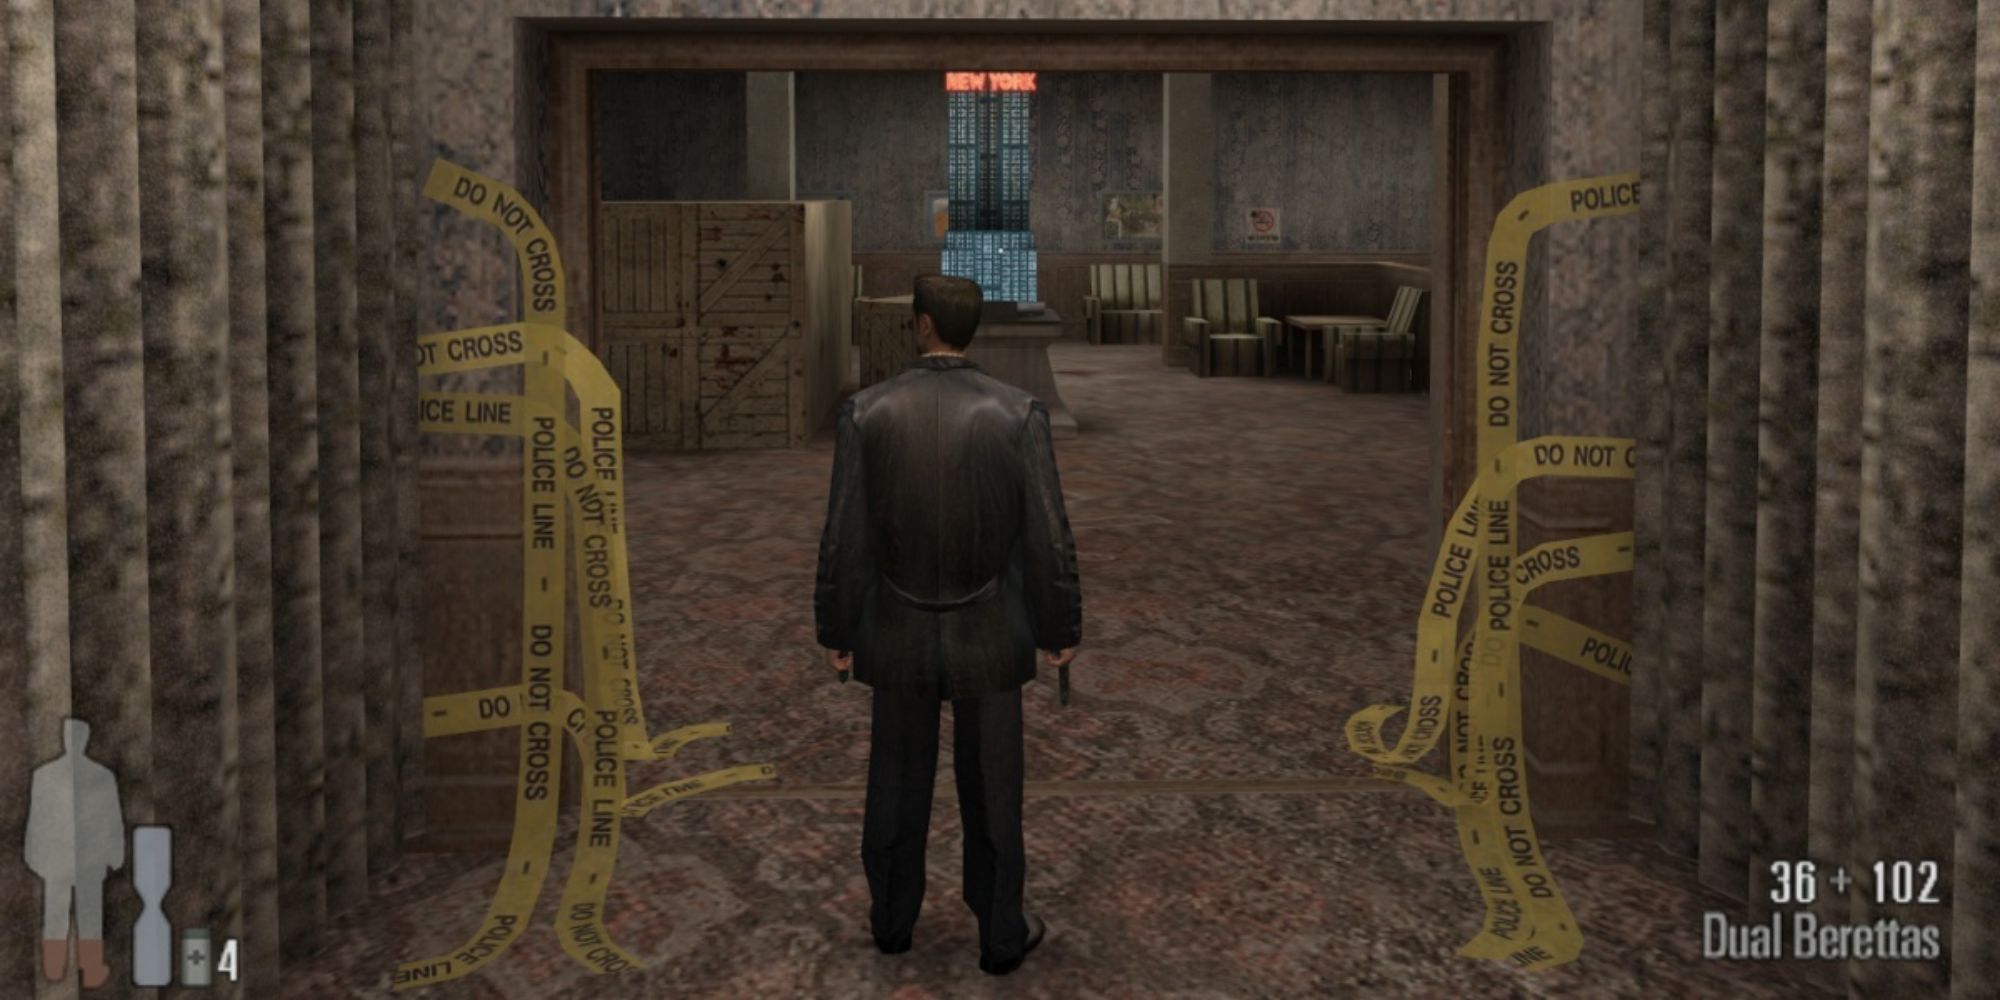 Screenshot from Max Payne of the protagonist standing in a hotel with police tape around.